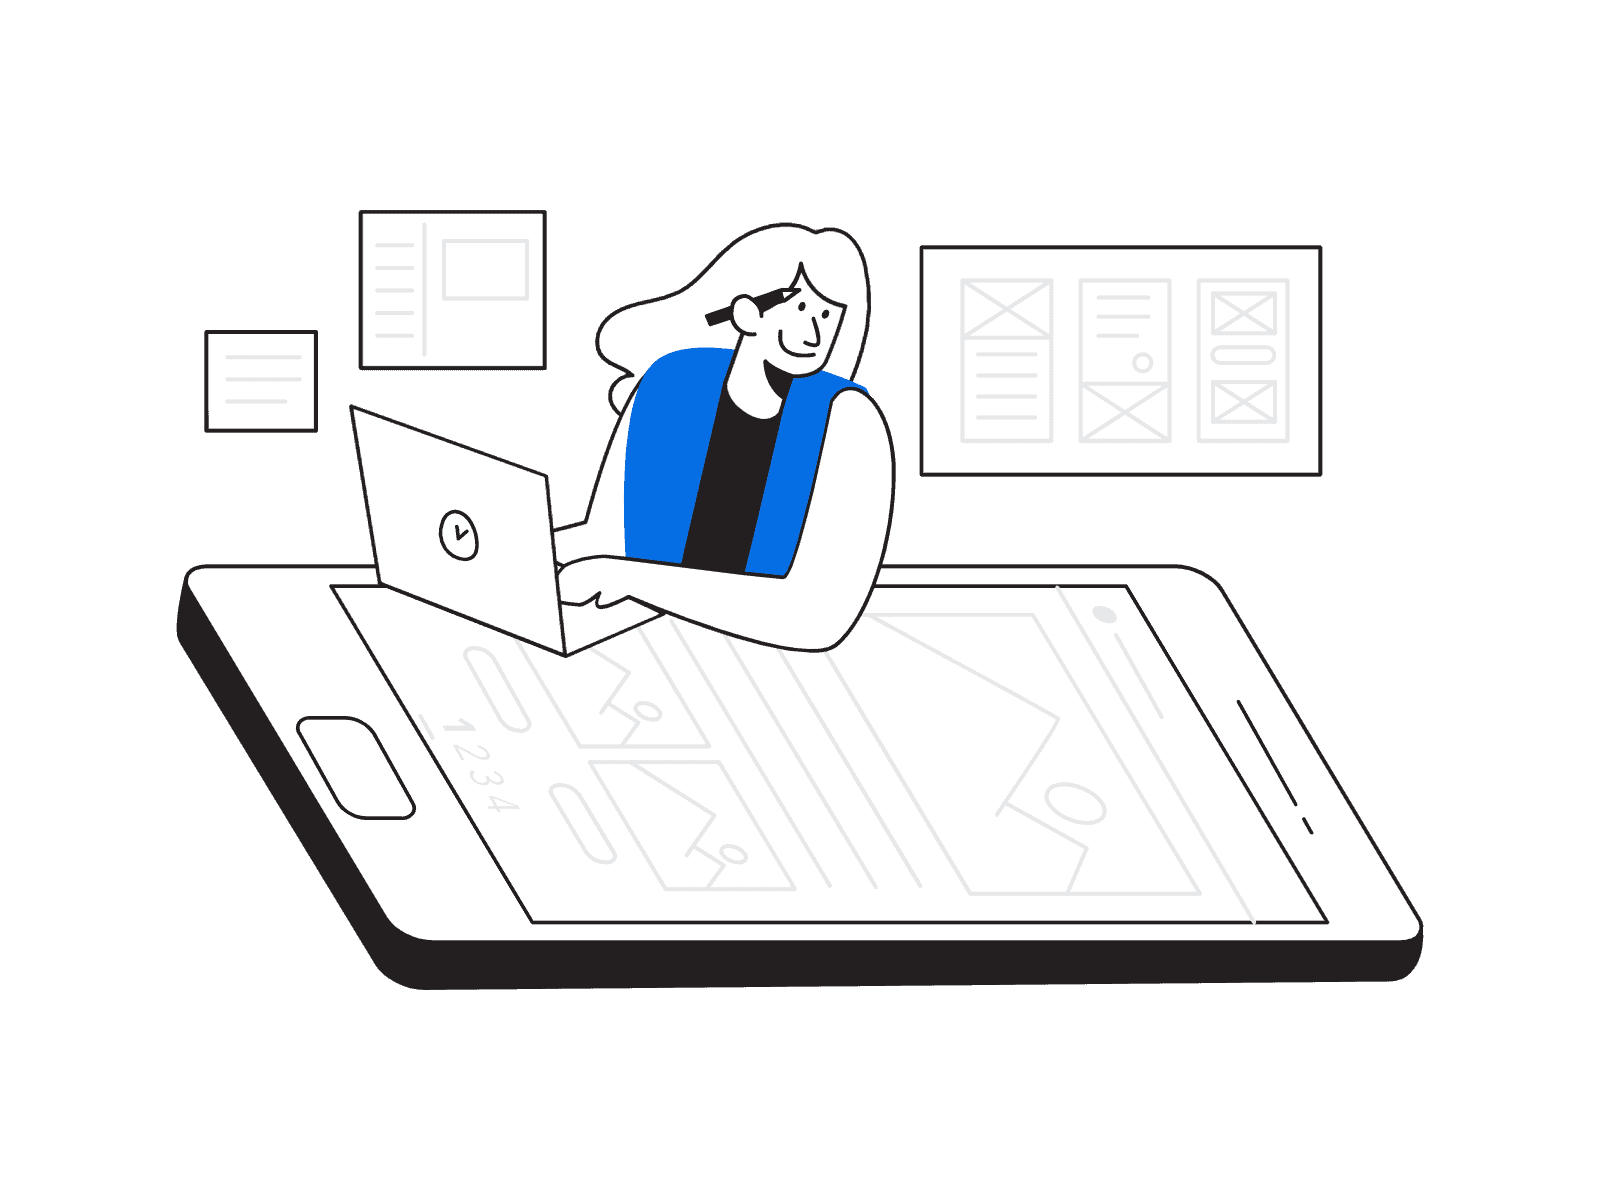 An illustration of a woman working on a laptop while considering pricing options.